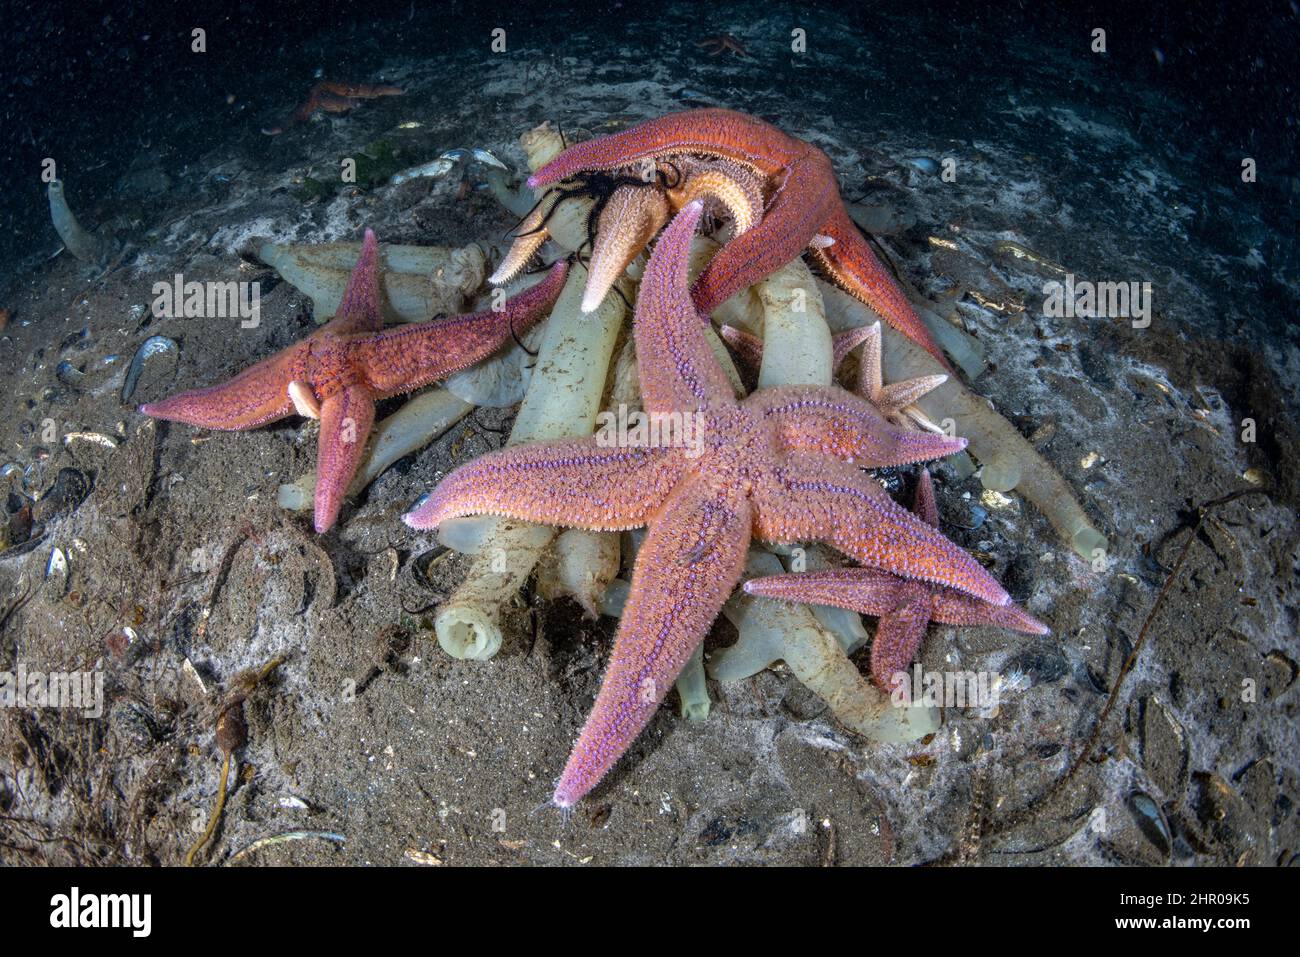 Starfish (Henricia sp.) feeding on sea squirts. Flatanger, coastal commune in central Norway, north of the Trondheimfjord, North Atlantic Ocean. Norwa Stock Photo